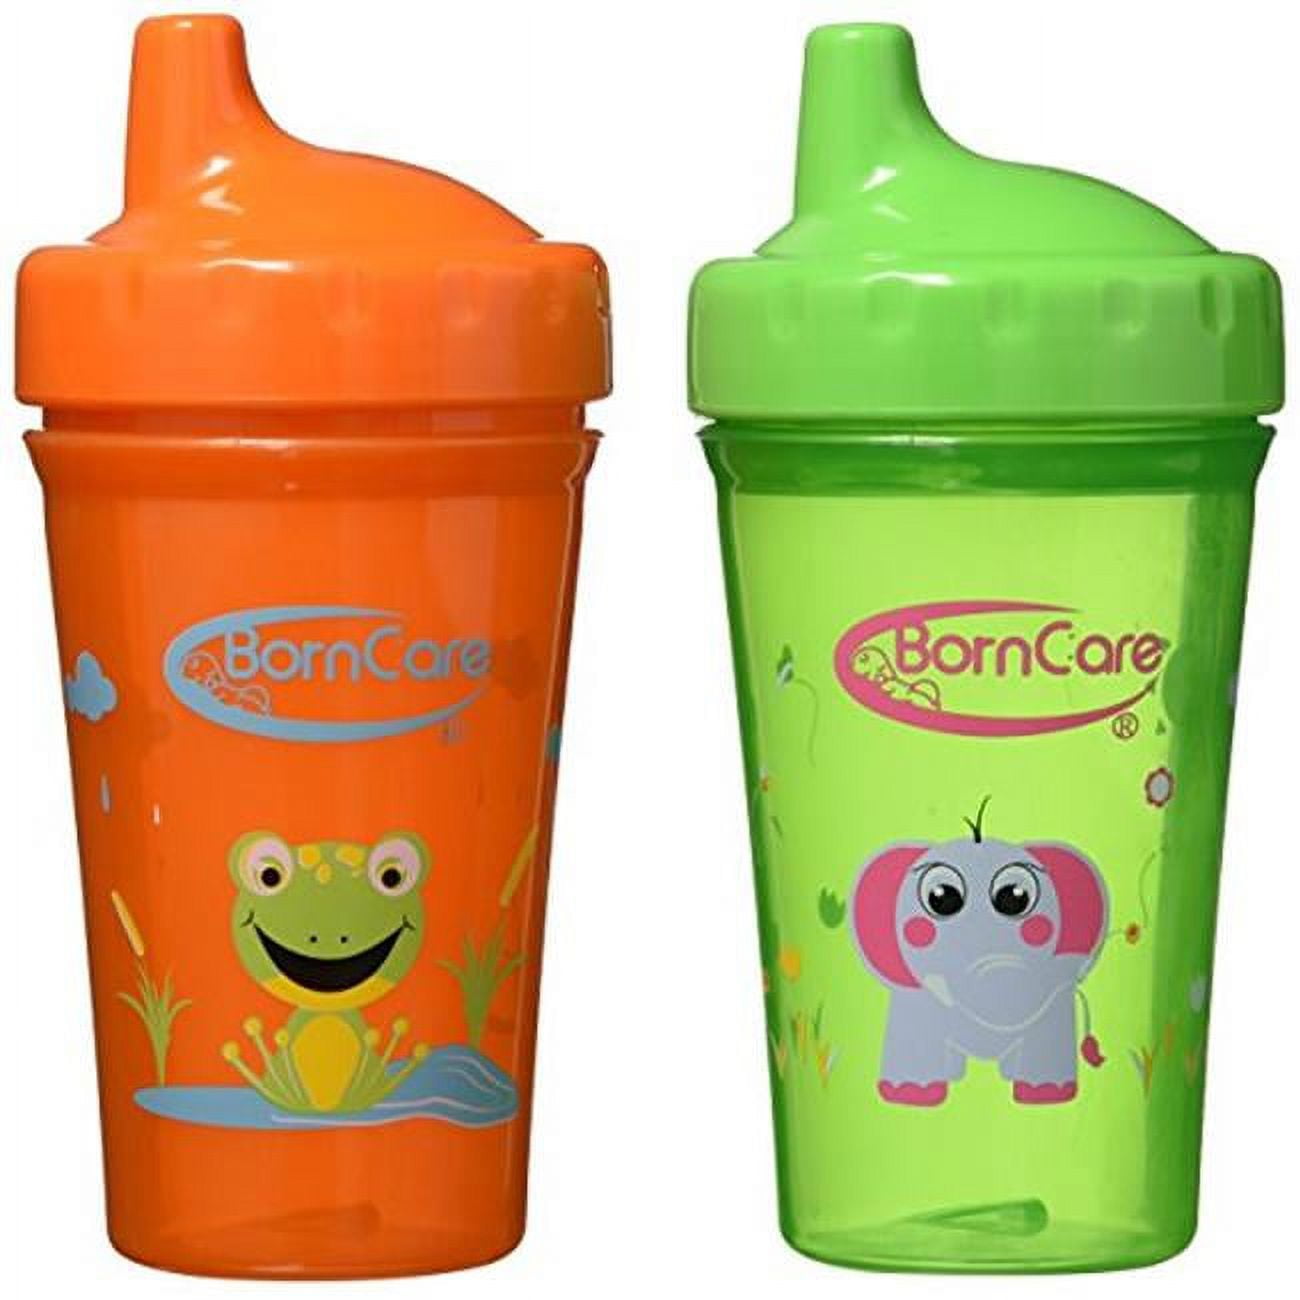 Bcws-159 10 Oz Non Spill Cup For Baby- 2 Pack